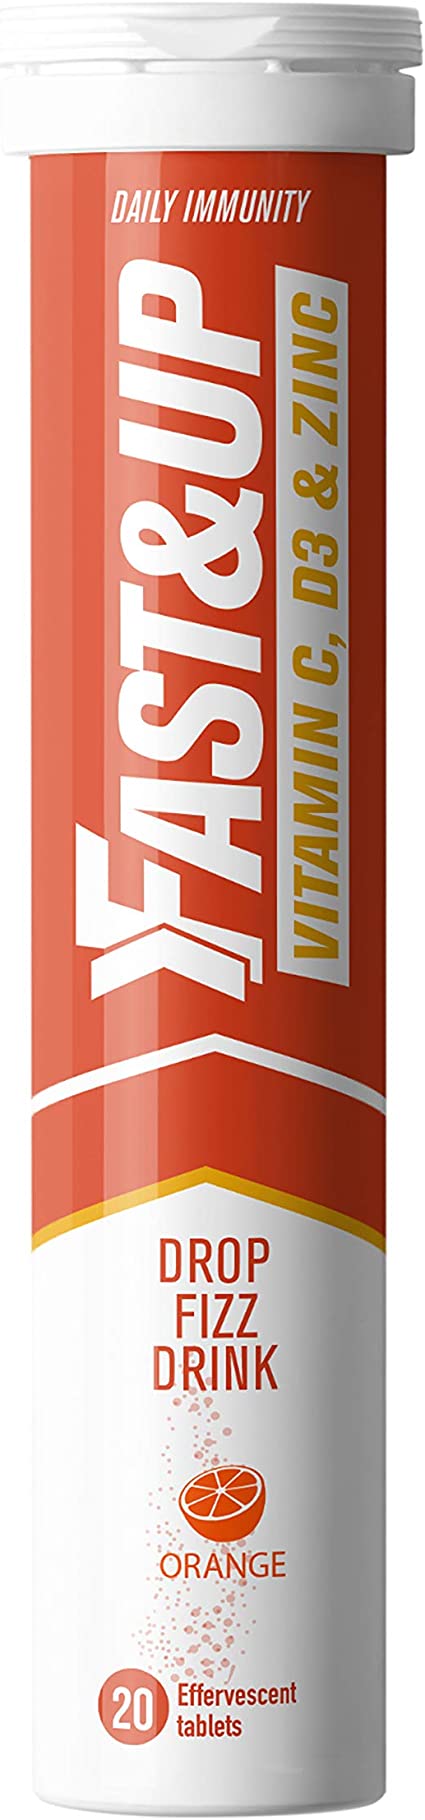 Fast&Up Vitamin C, Vitamin D & Zinc - Complete Immunity Support - Best Defence - 20 Effervescent Tablets - One Daily - Orange Flavour